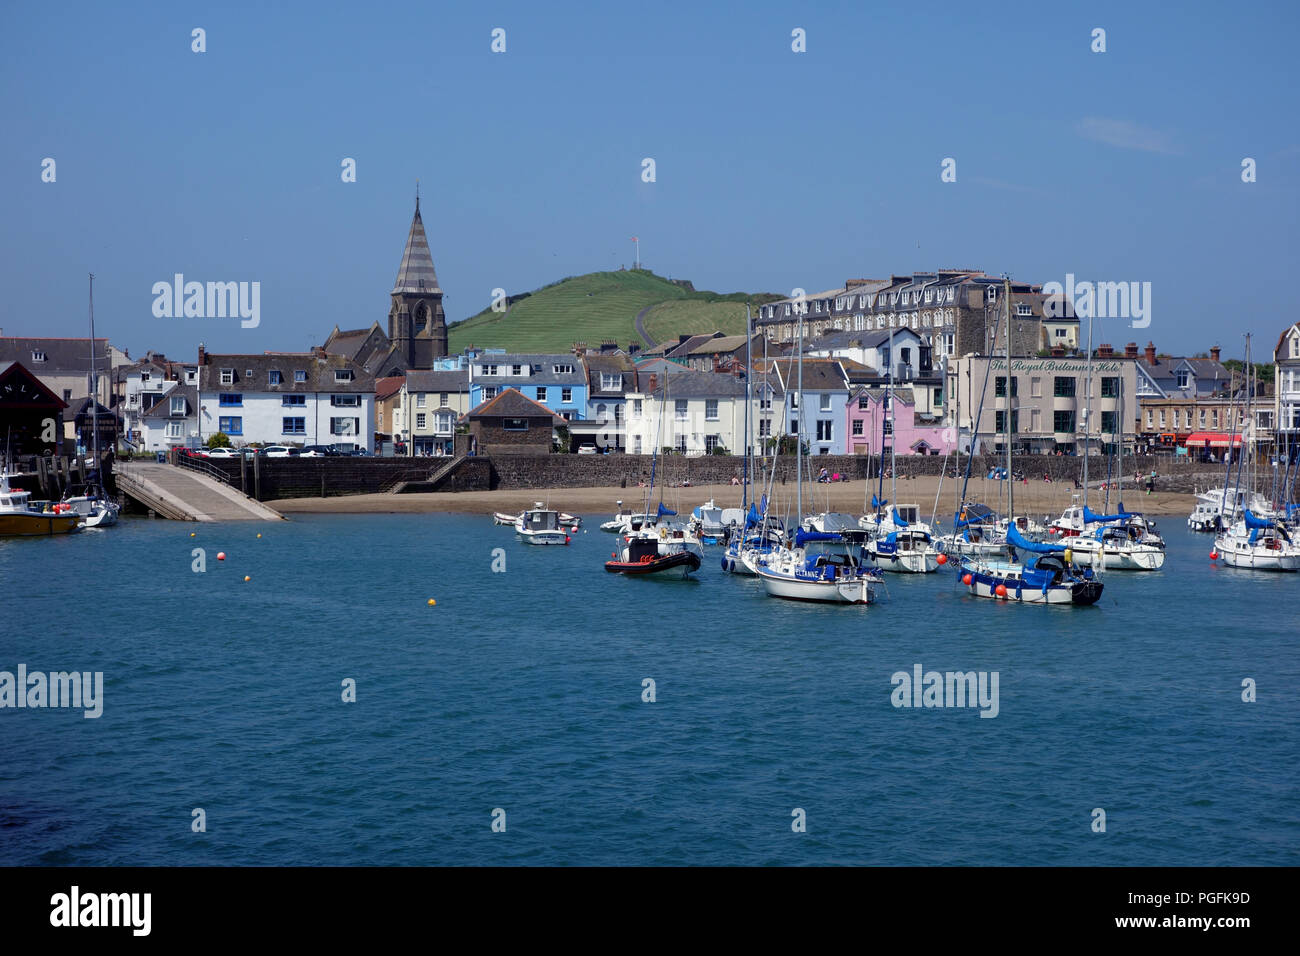 Boats in Ilfracombe Harbour on the South West Coastal Path, Devon, England, UK. Stock Photo